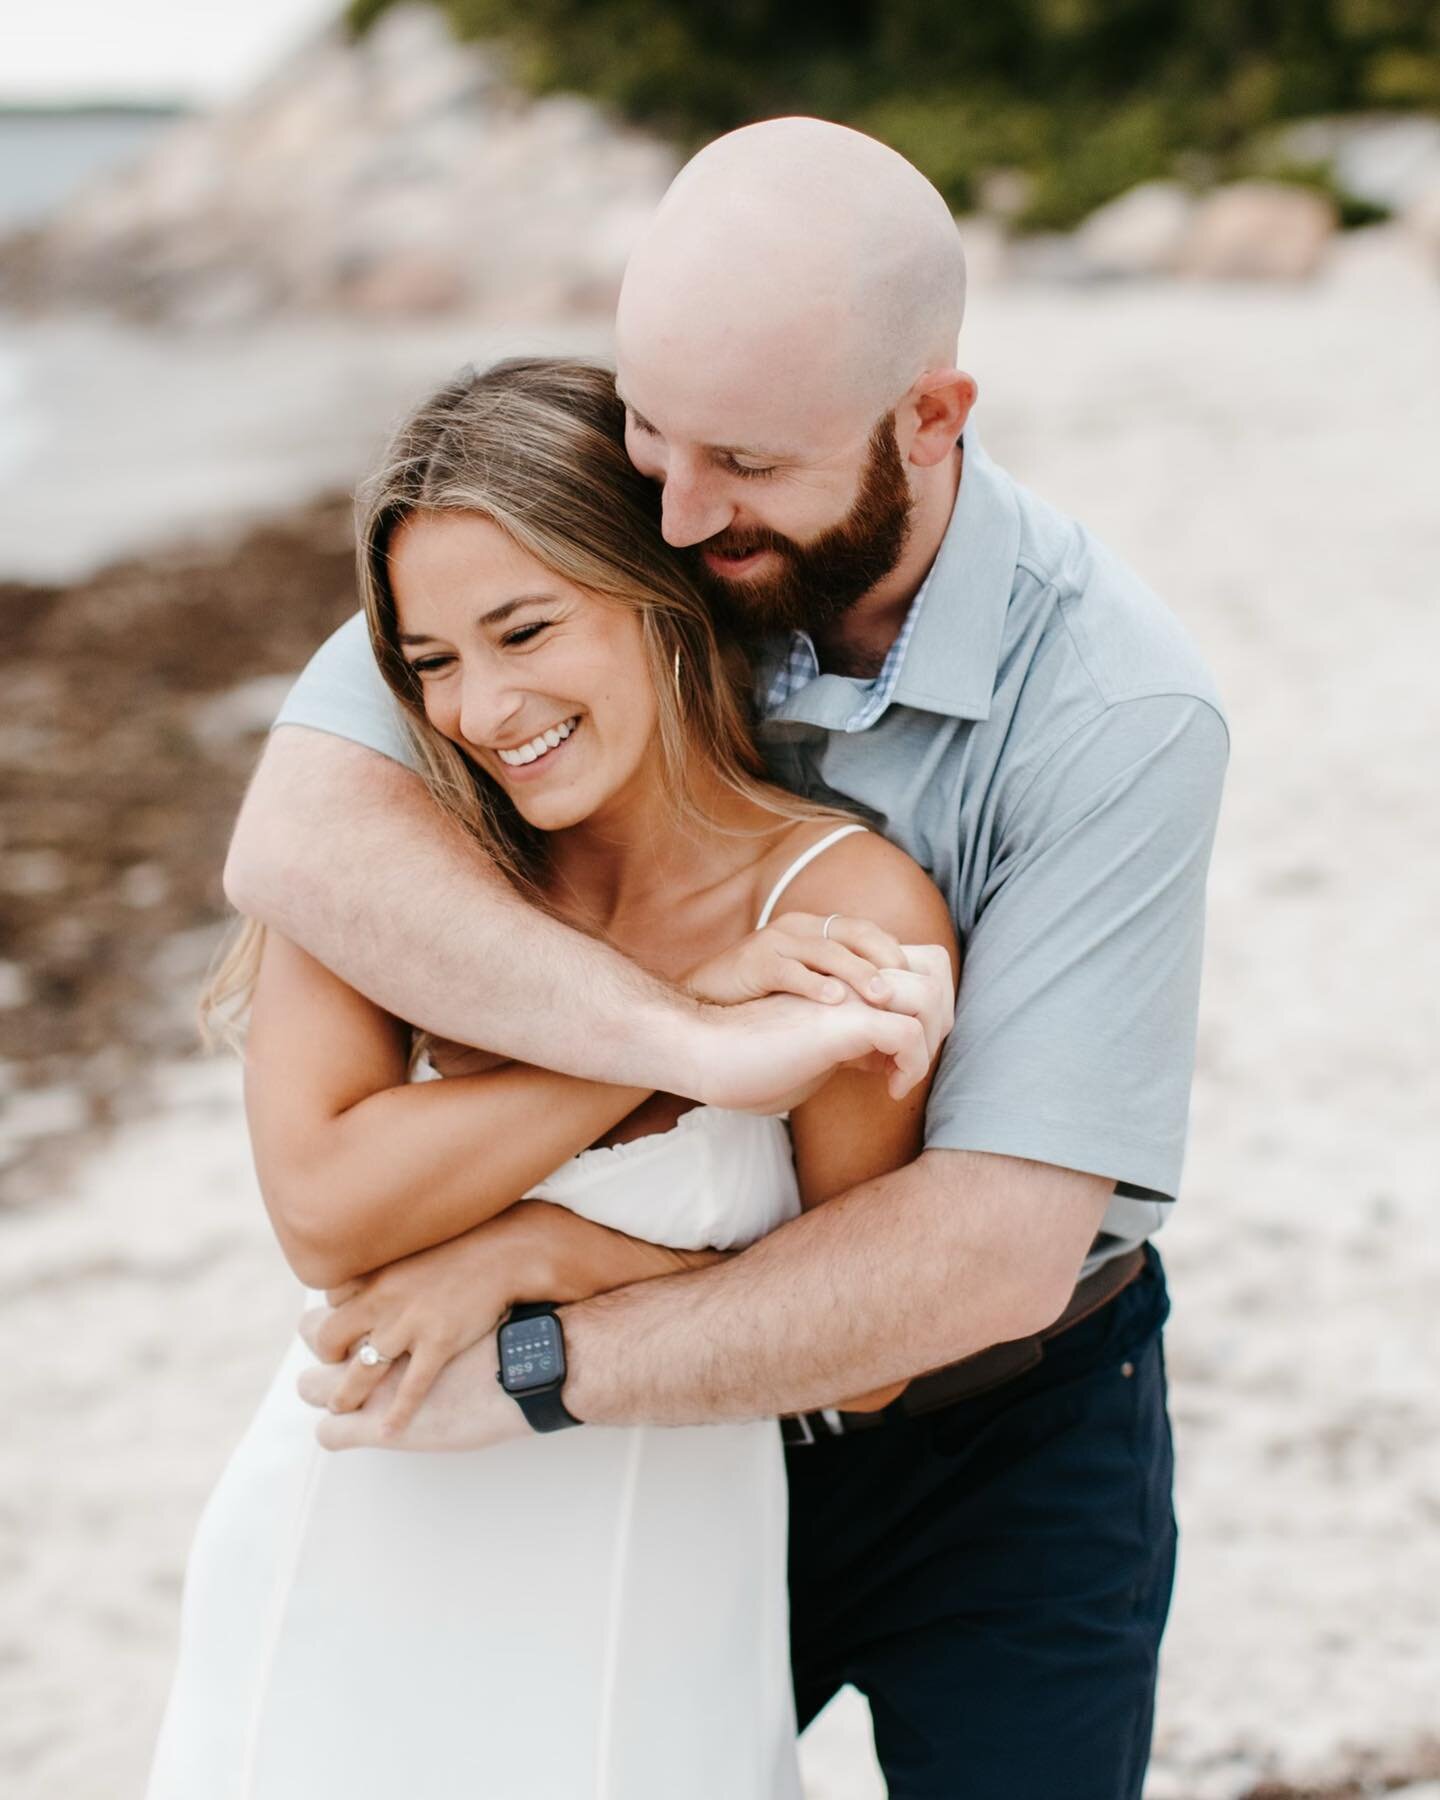 9 years in the making 💕
.
.
we are OBSESSED with the photos from our engagement shoot last night 🥰
.
.
we are also OBSESSED with our wedding photographers @the_gowans &mdash; srsly cannot recommend them enough (+ shoutout to @haleyplez for the rec)